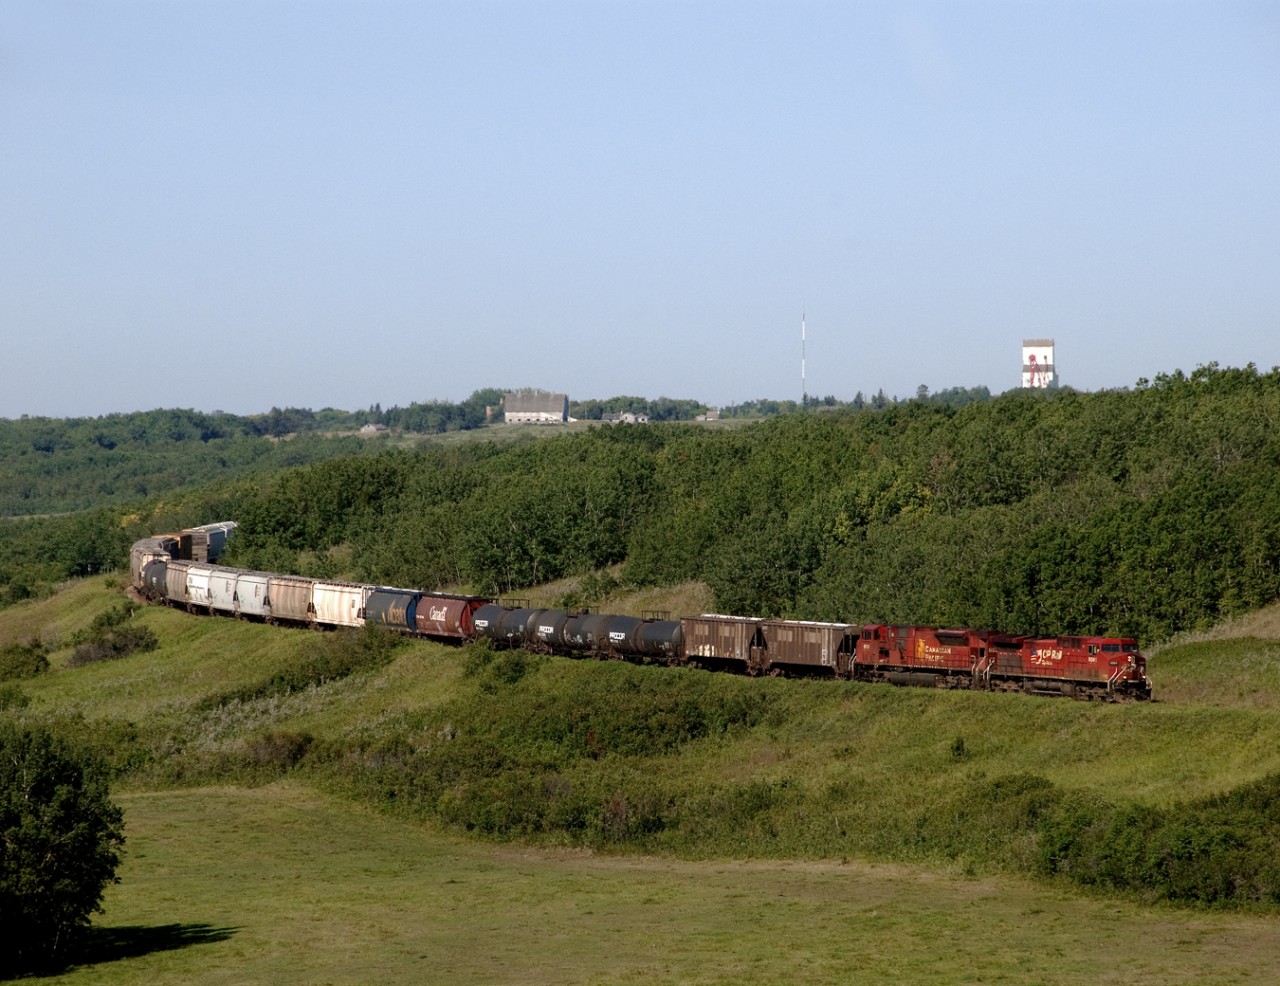 Eastbound mixed freight 454 on CP's North Main drops into the Birdtail River Valley just east of Birtle, elevators above 1st unit. This is one of 3 steep valley crossings on the Bredenbury Subdivision sometimes referred to as Manitoba's mountain railroad.